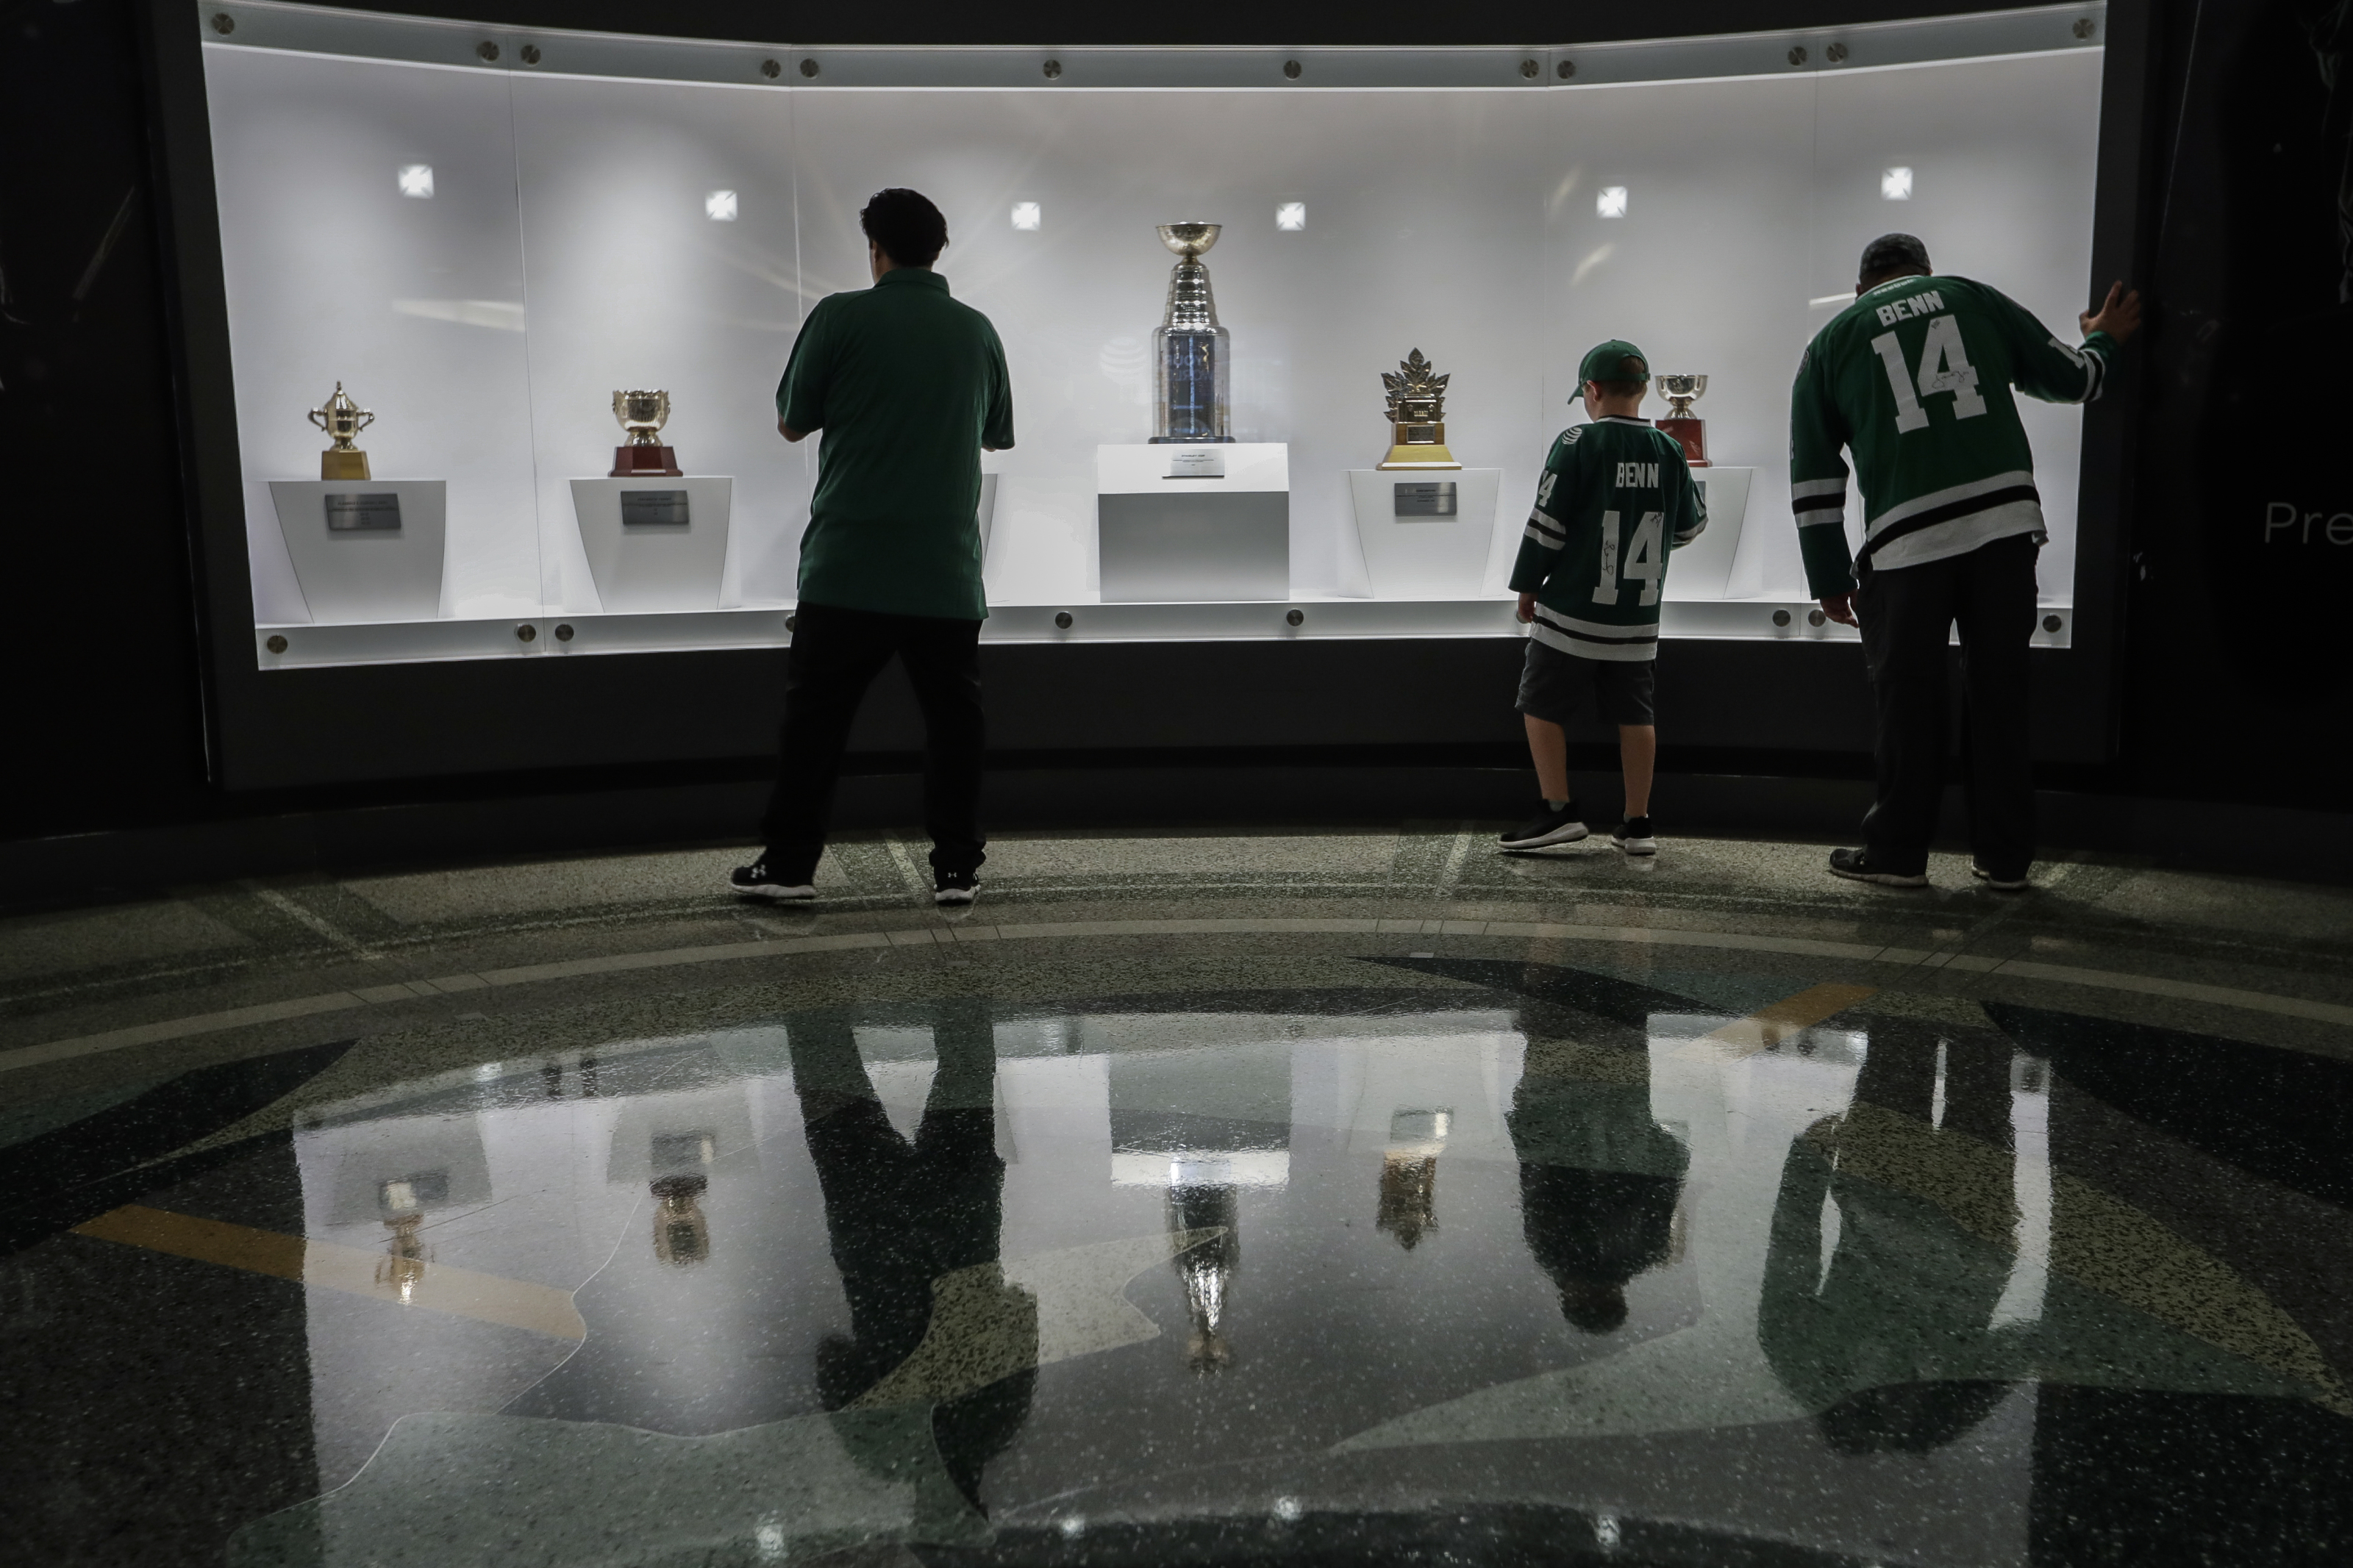 Dallas Stars president thinks AAC is the 'perfect building', hopes